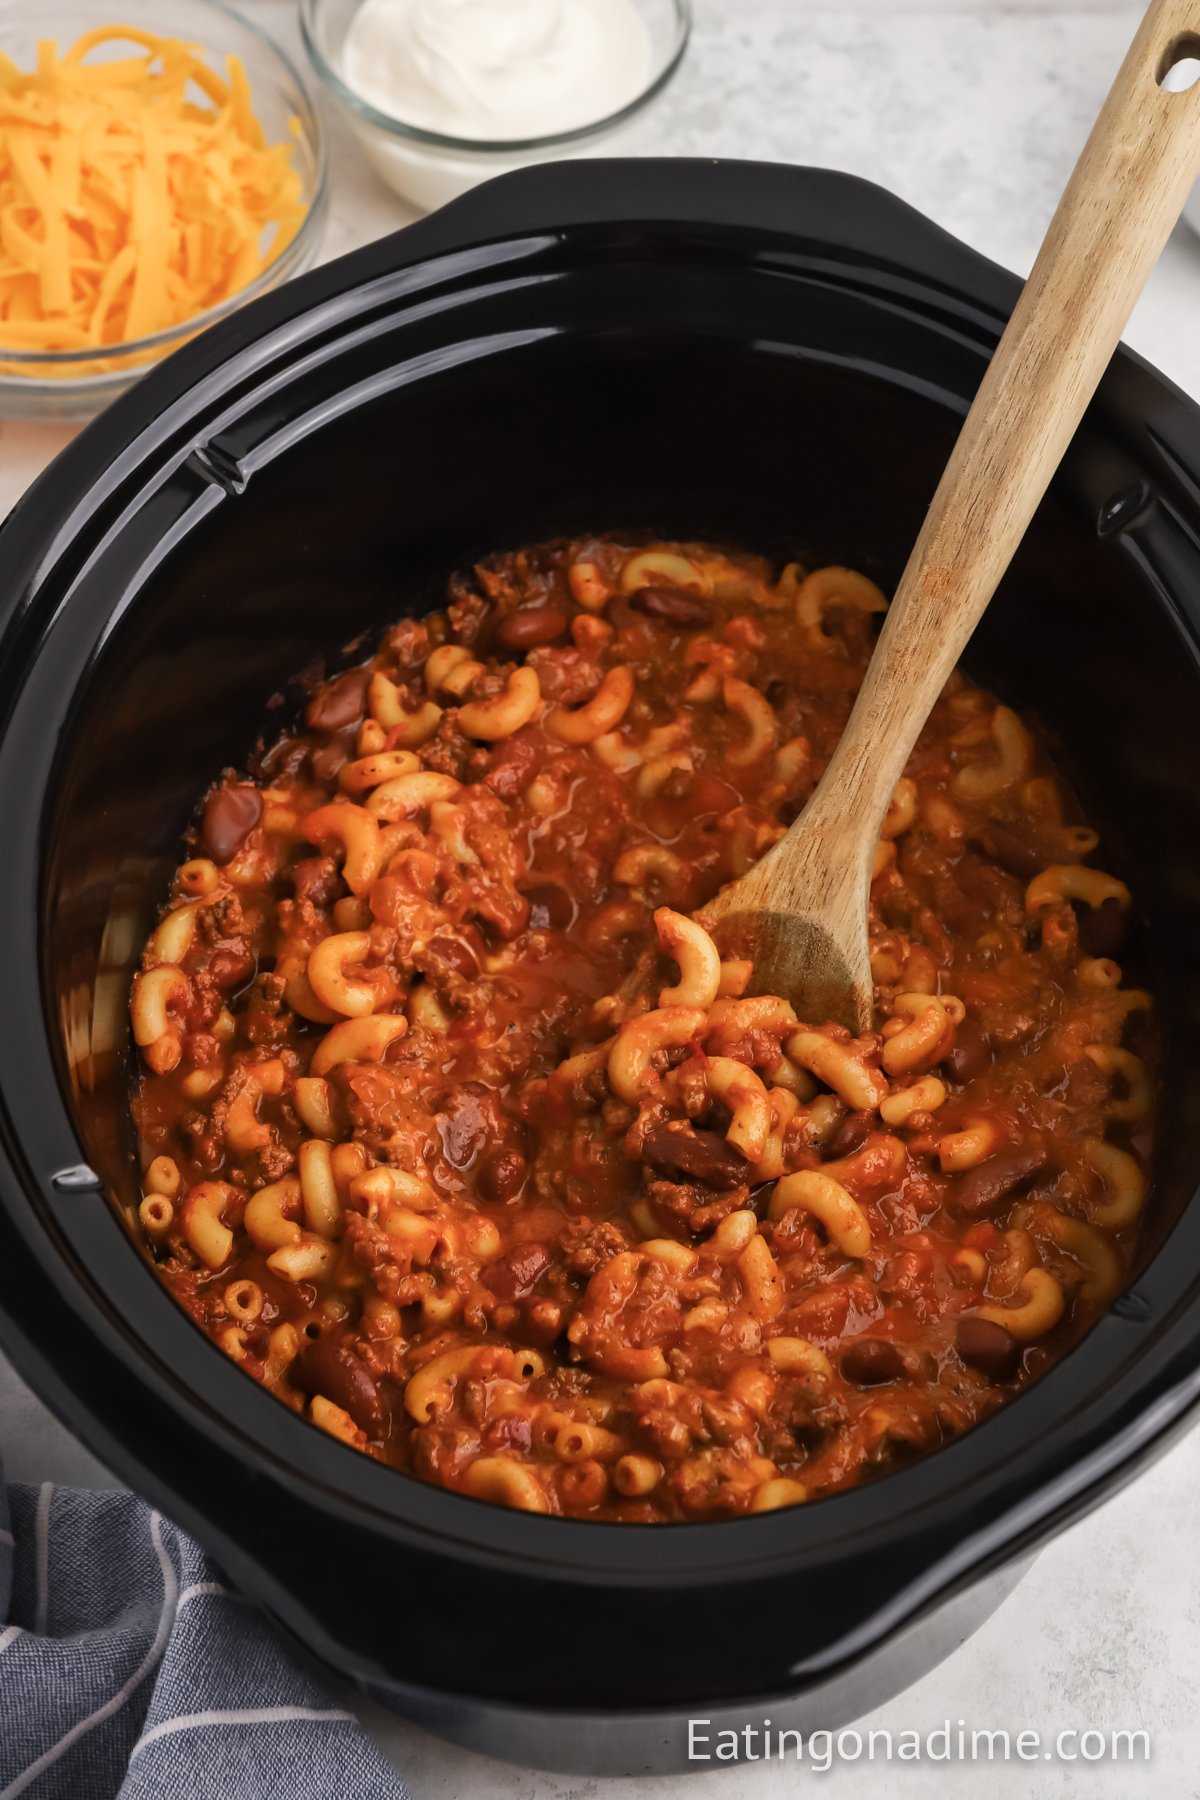 Chili Mac and Cheese in a slow cooker with a wooden spoon